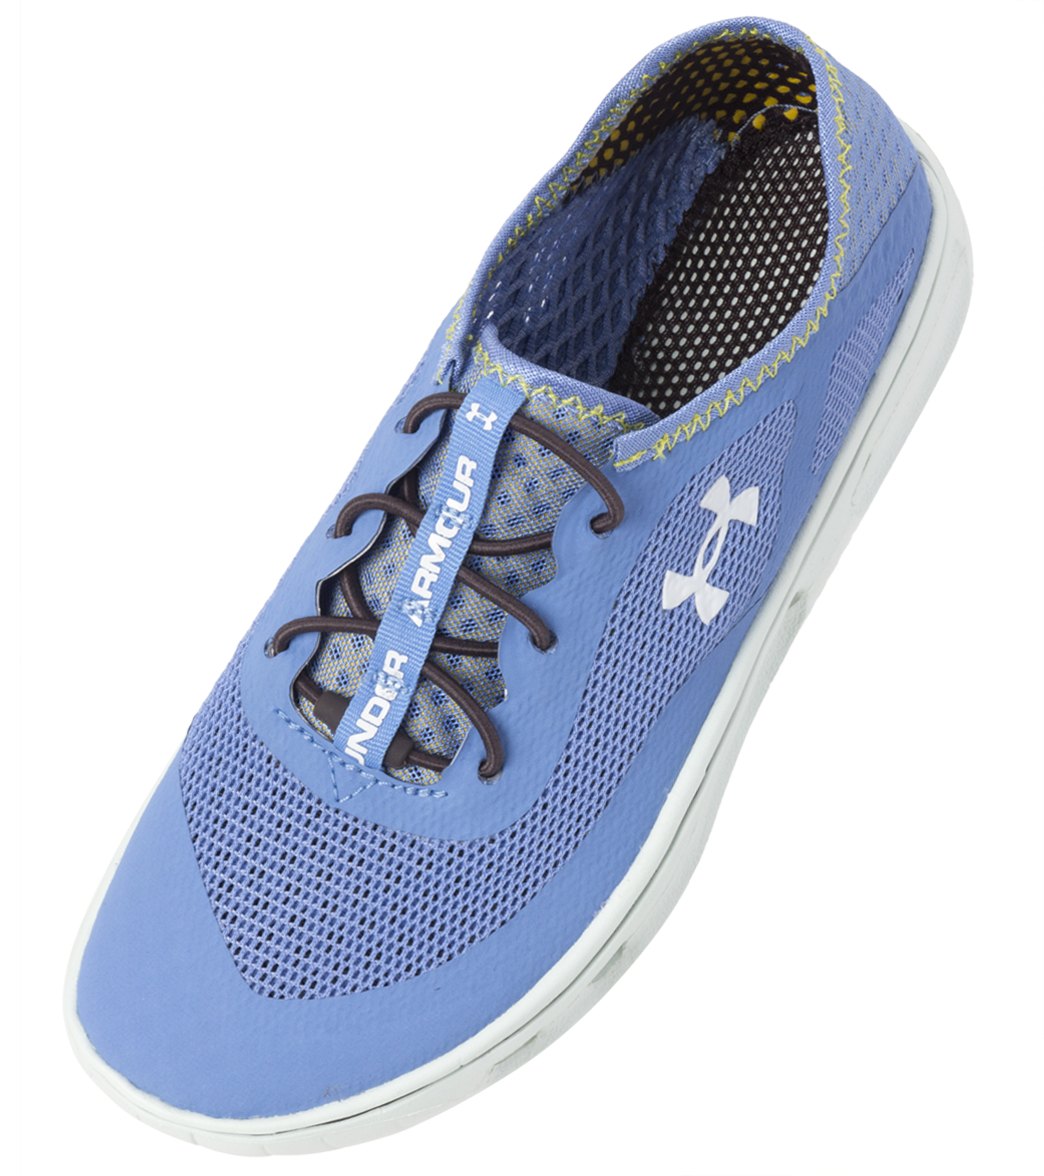 under armour women's water shoes